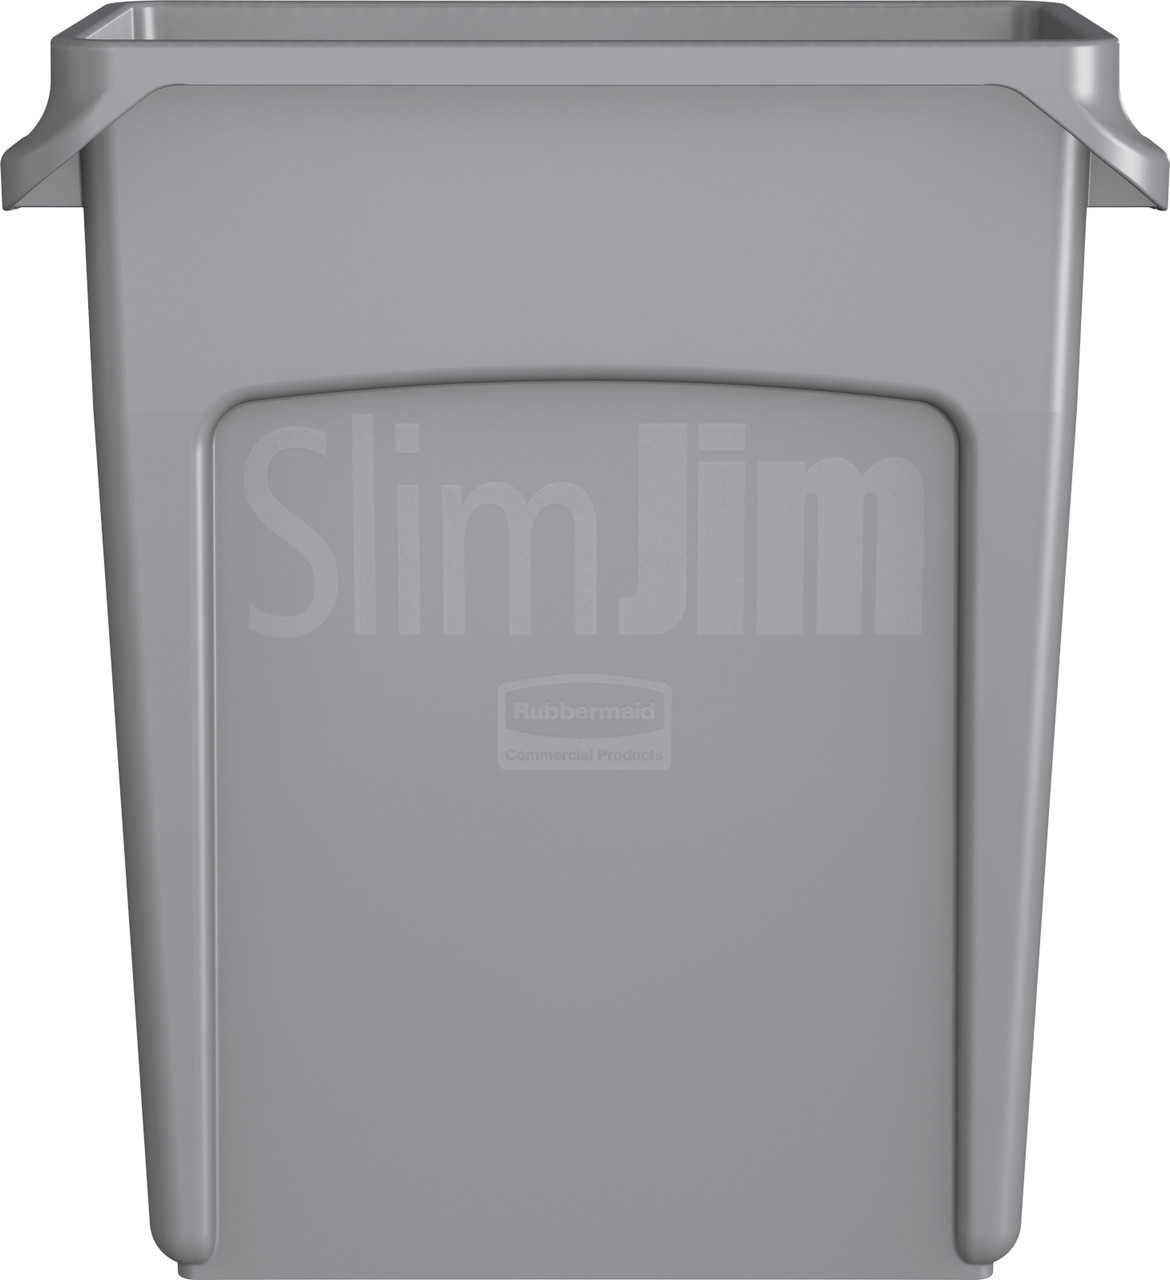 1971258 - Side of Slim Jim container showing depth of container and side venting channel